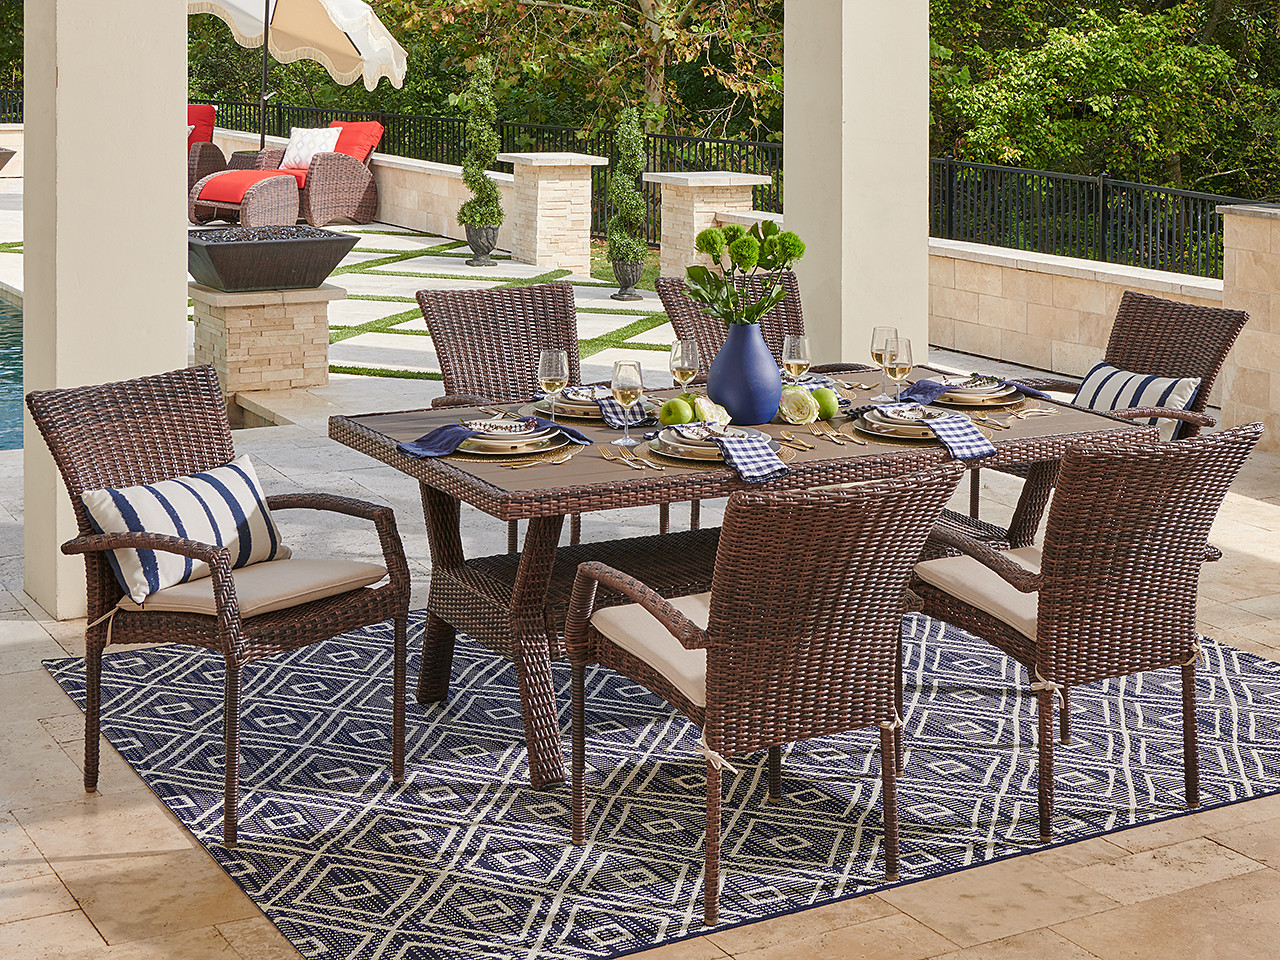 Valencia Sangria Outdoor Wicker 7 Pc. Dining Set with 76 x 42 in. Table